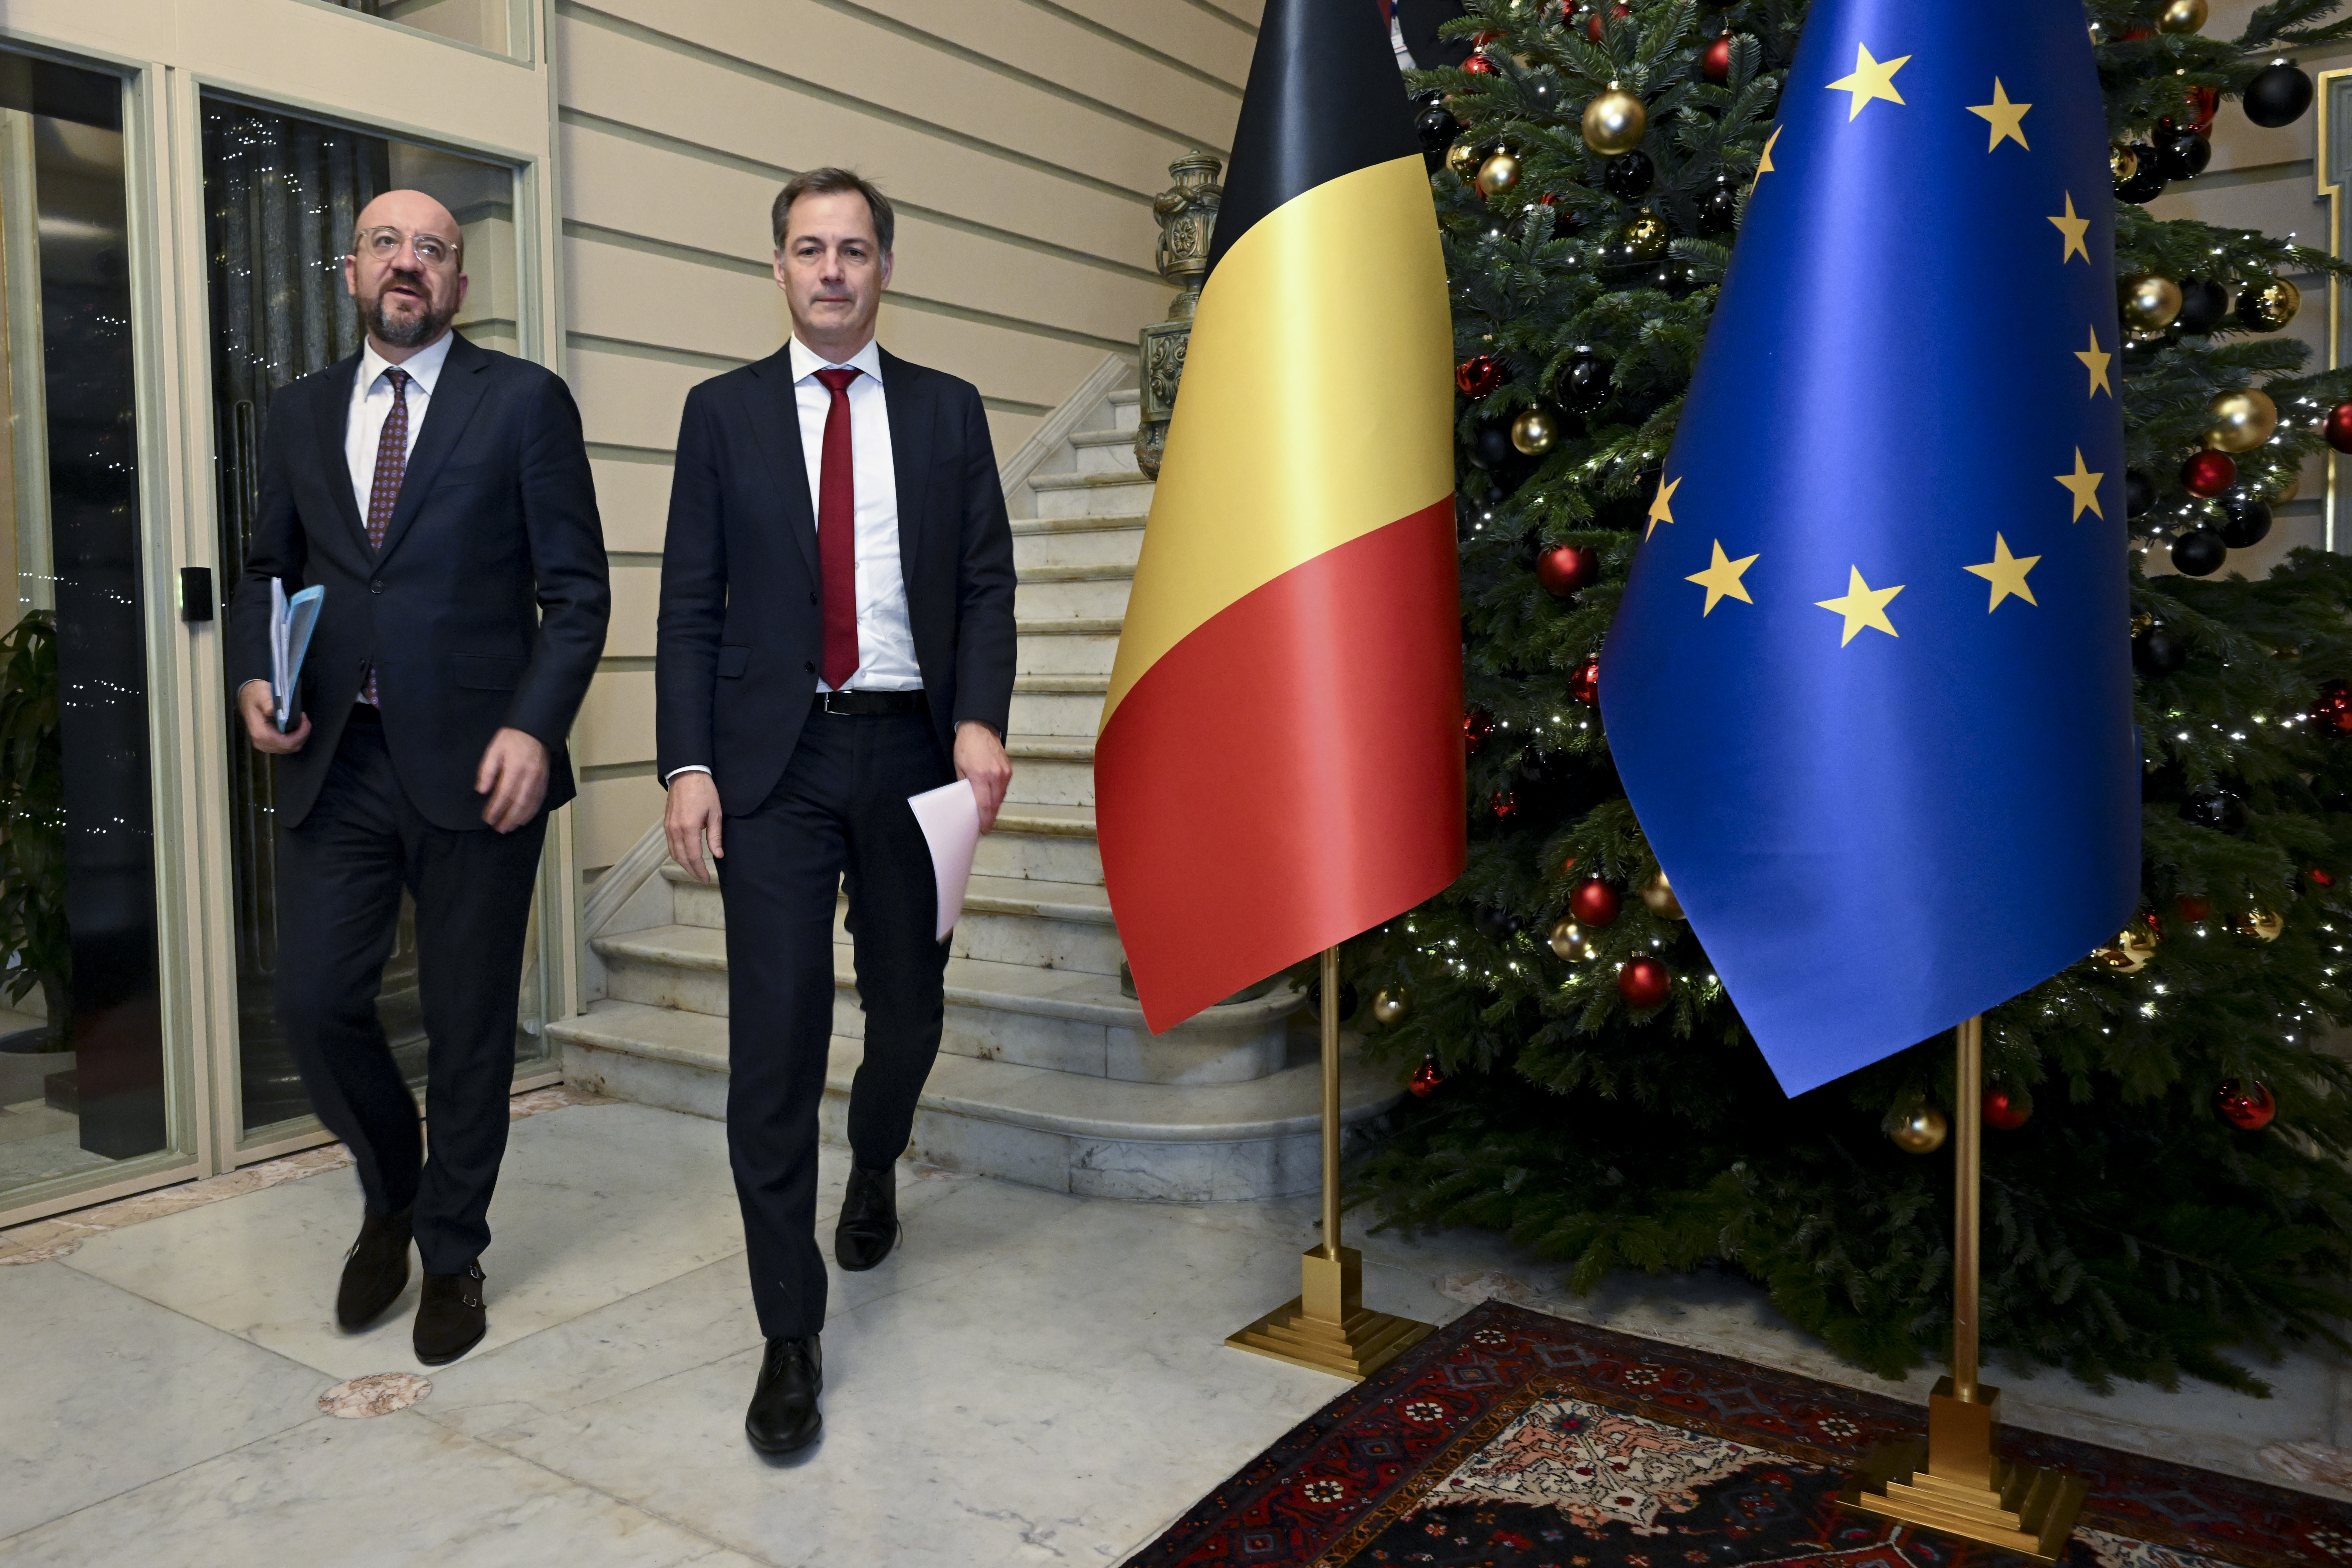 Belgium to assume the presidency of the Council of the EU